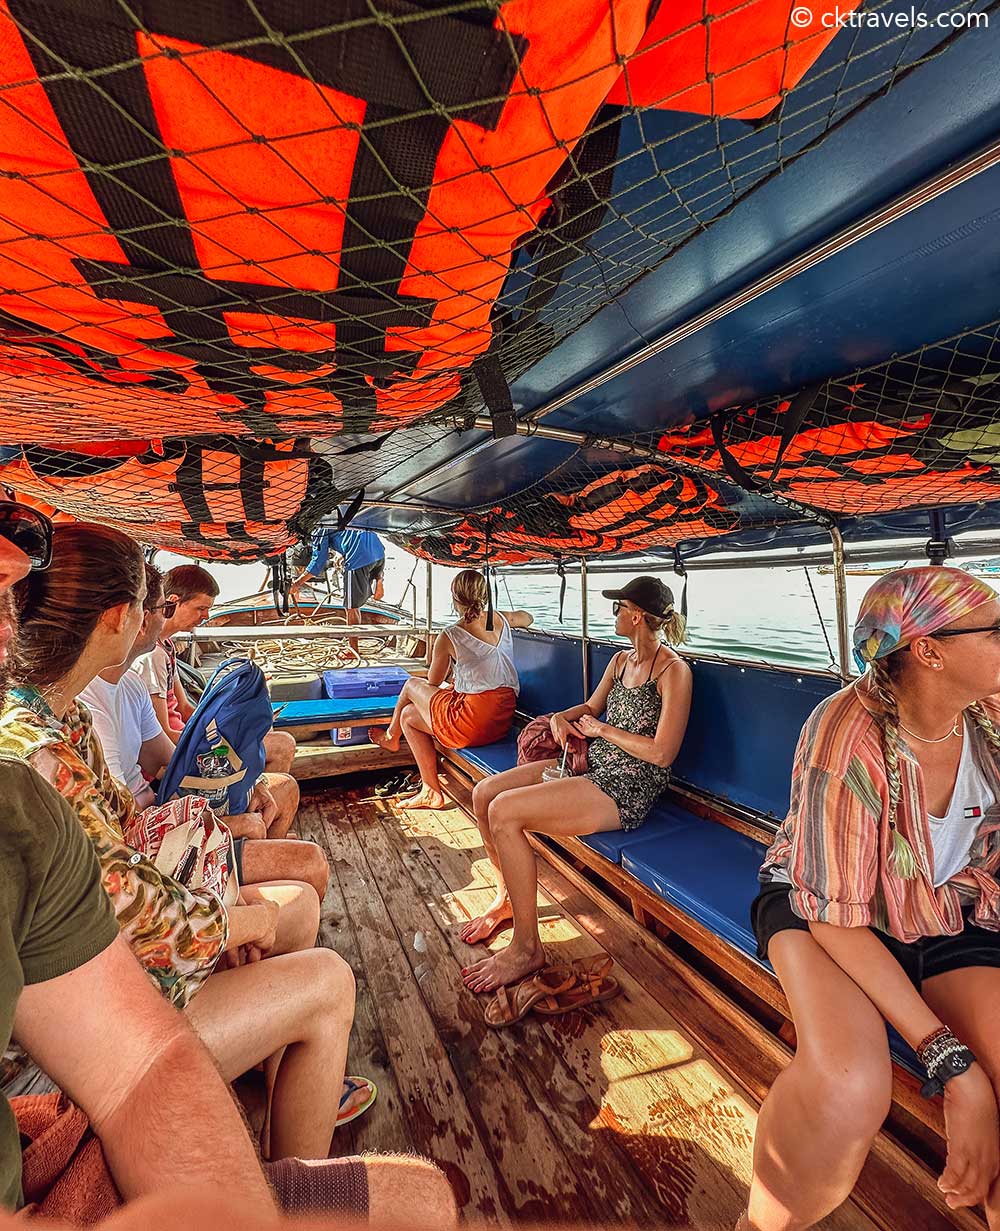 How to get from Krabi (Ao Nang) to Railay Beach by longtail boat 